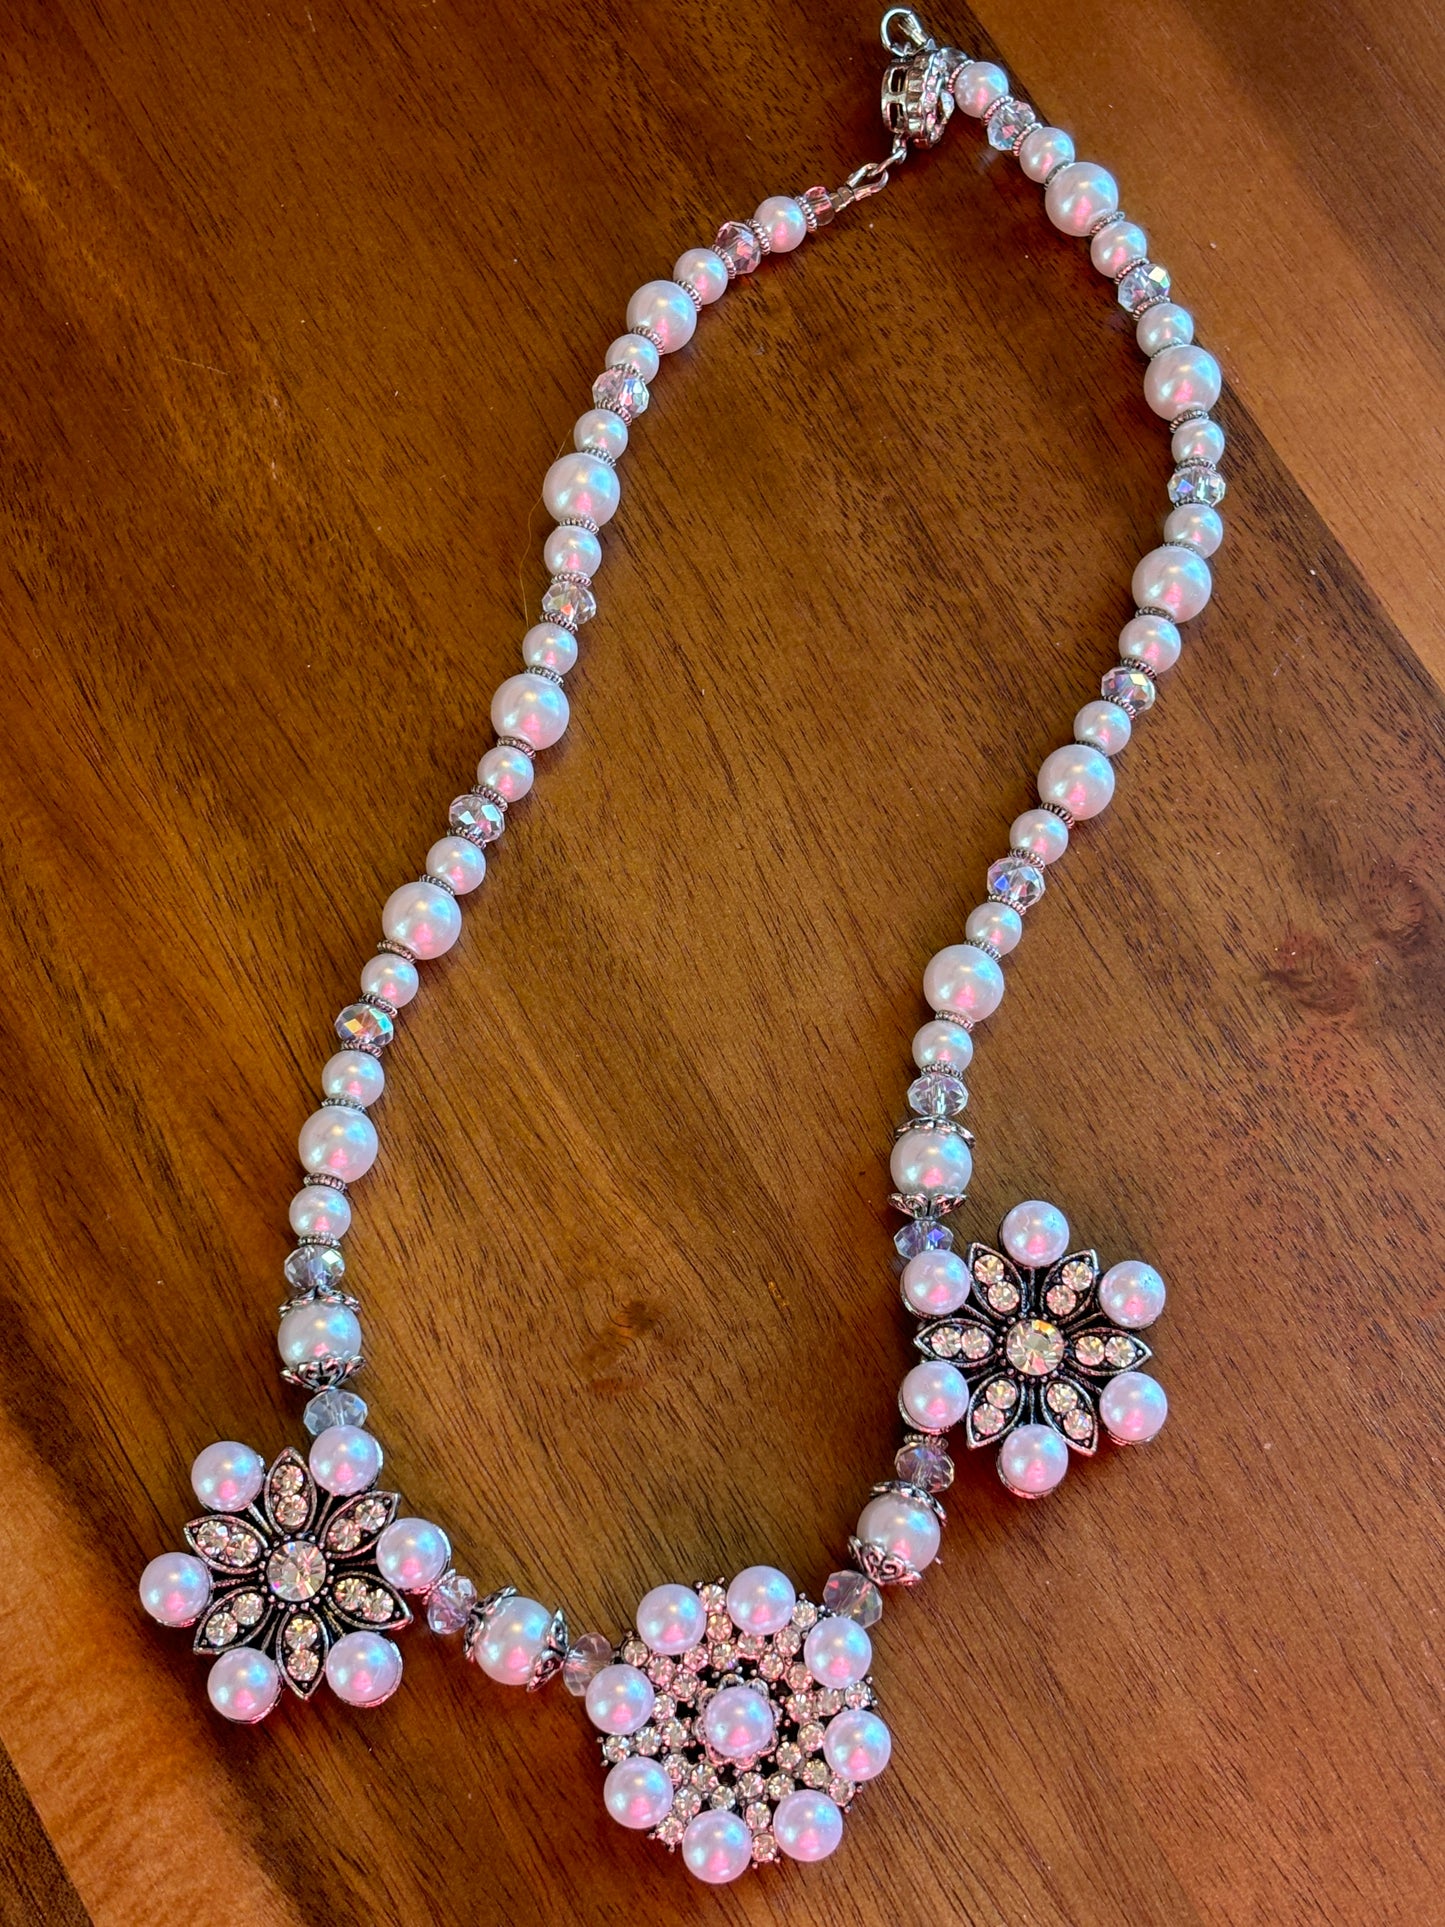 Floral White Pearl and Crystal Necklace 3 Pendant Flowers, SALE!